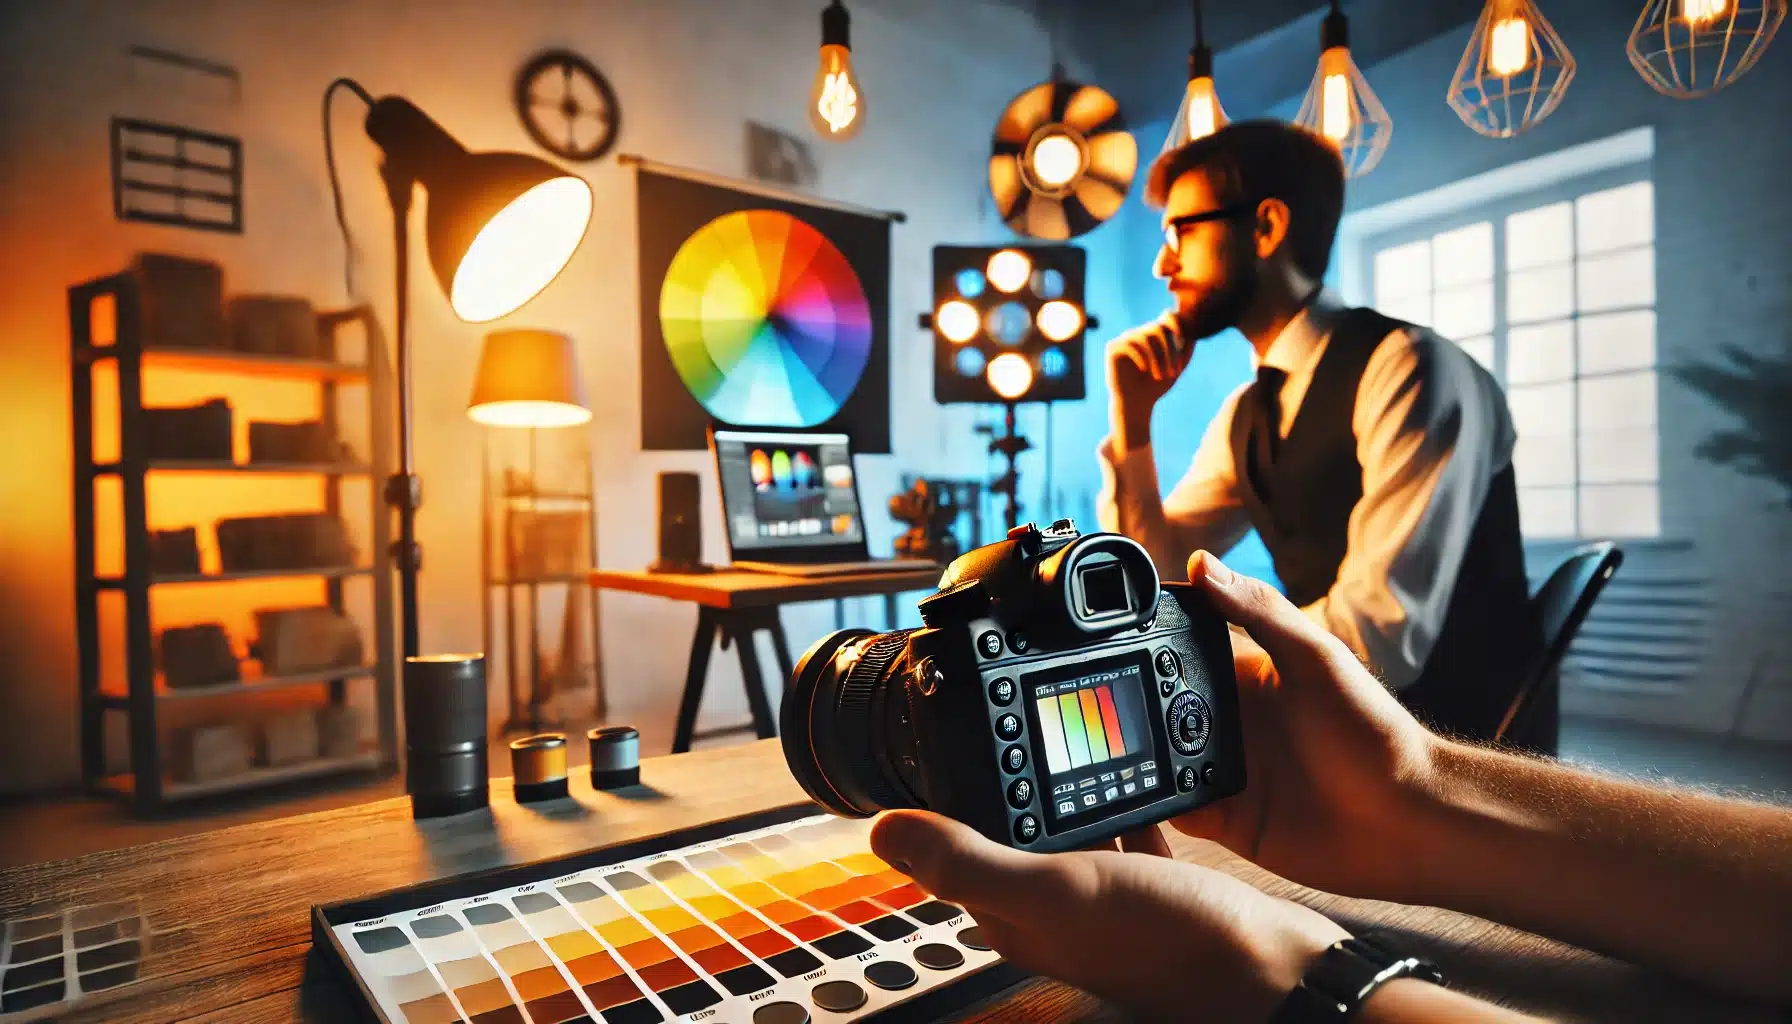 A photographer adjusting the white balance and color temperature settings on a camera in a studio, with a color chart and lighting equipment in the background showing warm and cool tones.